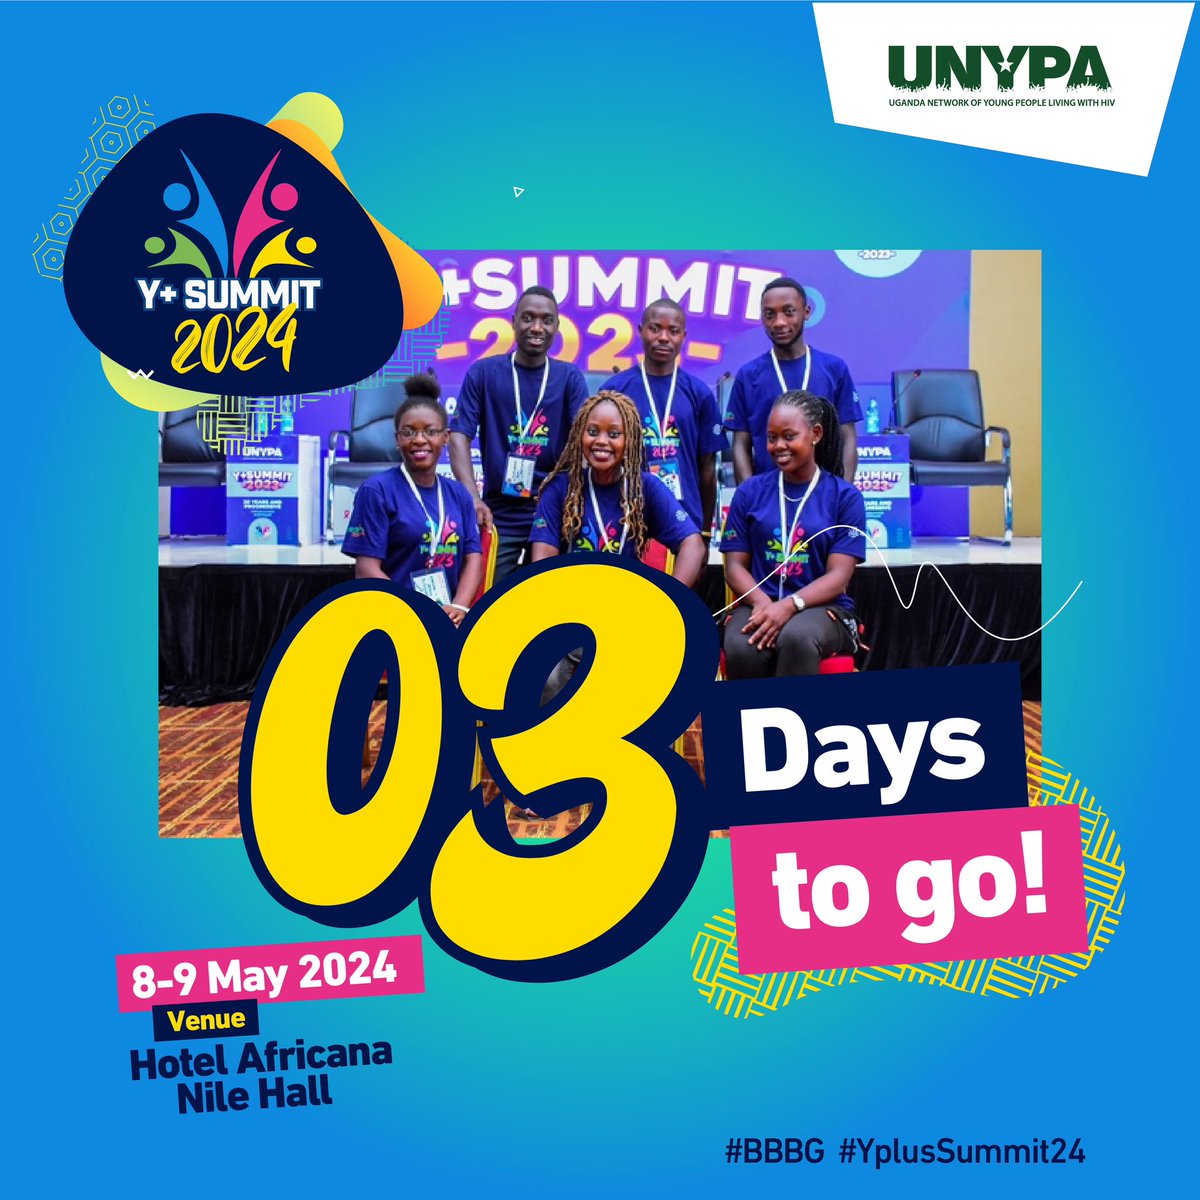 Betting on the 3️⃣ goals for the 🐘 yesterday was like an inside joke😂😂. Guess what 😦😦. 3️⃣ days to go. #BBBG #YPlusSummit24